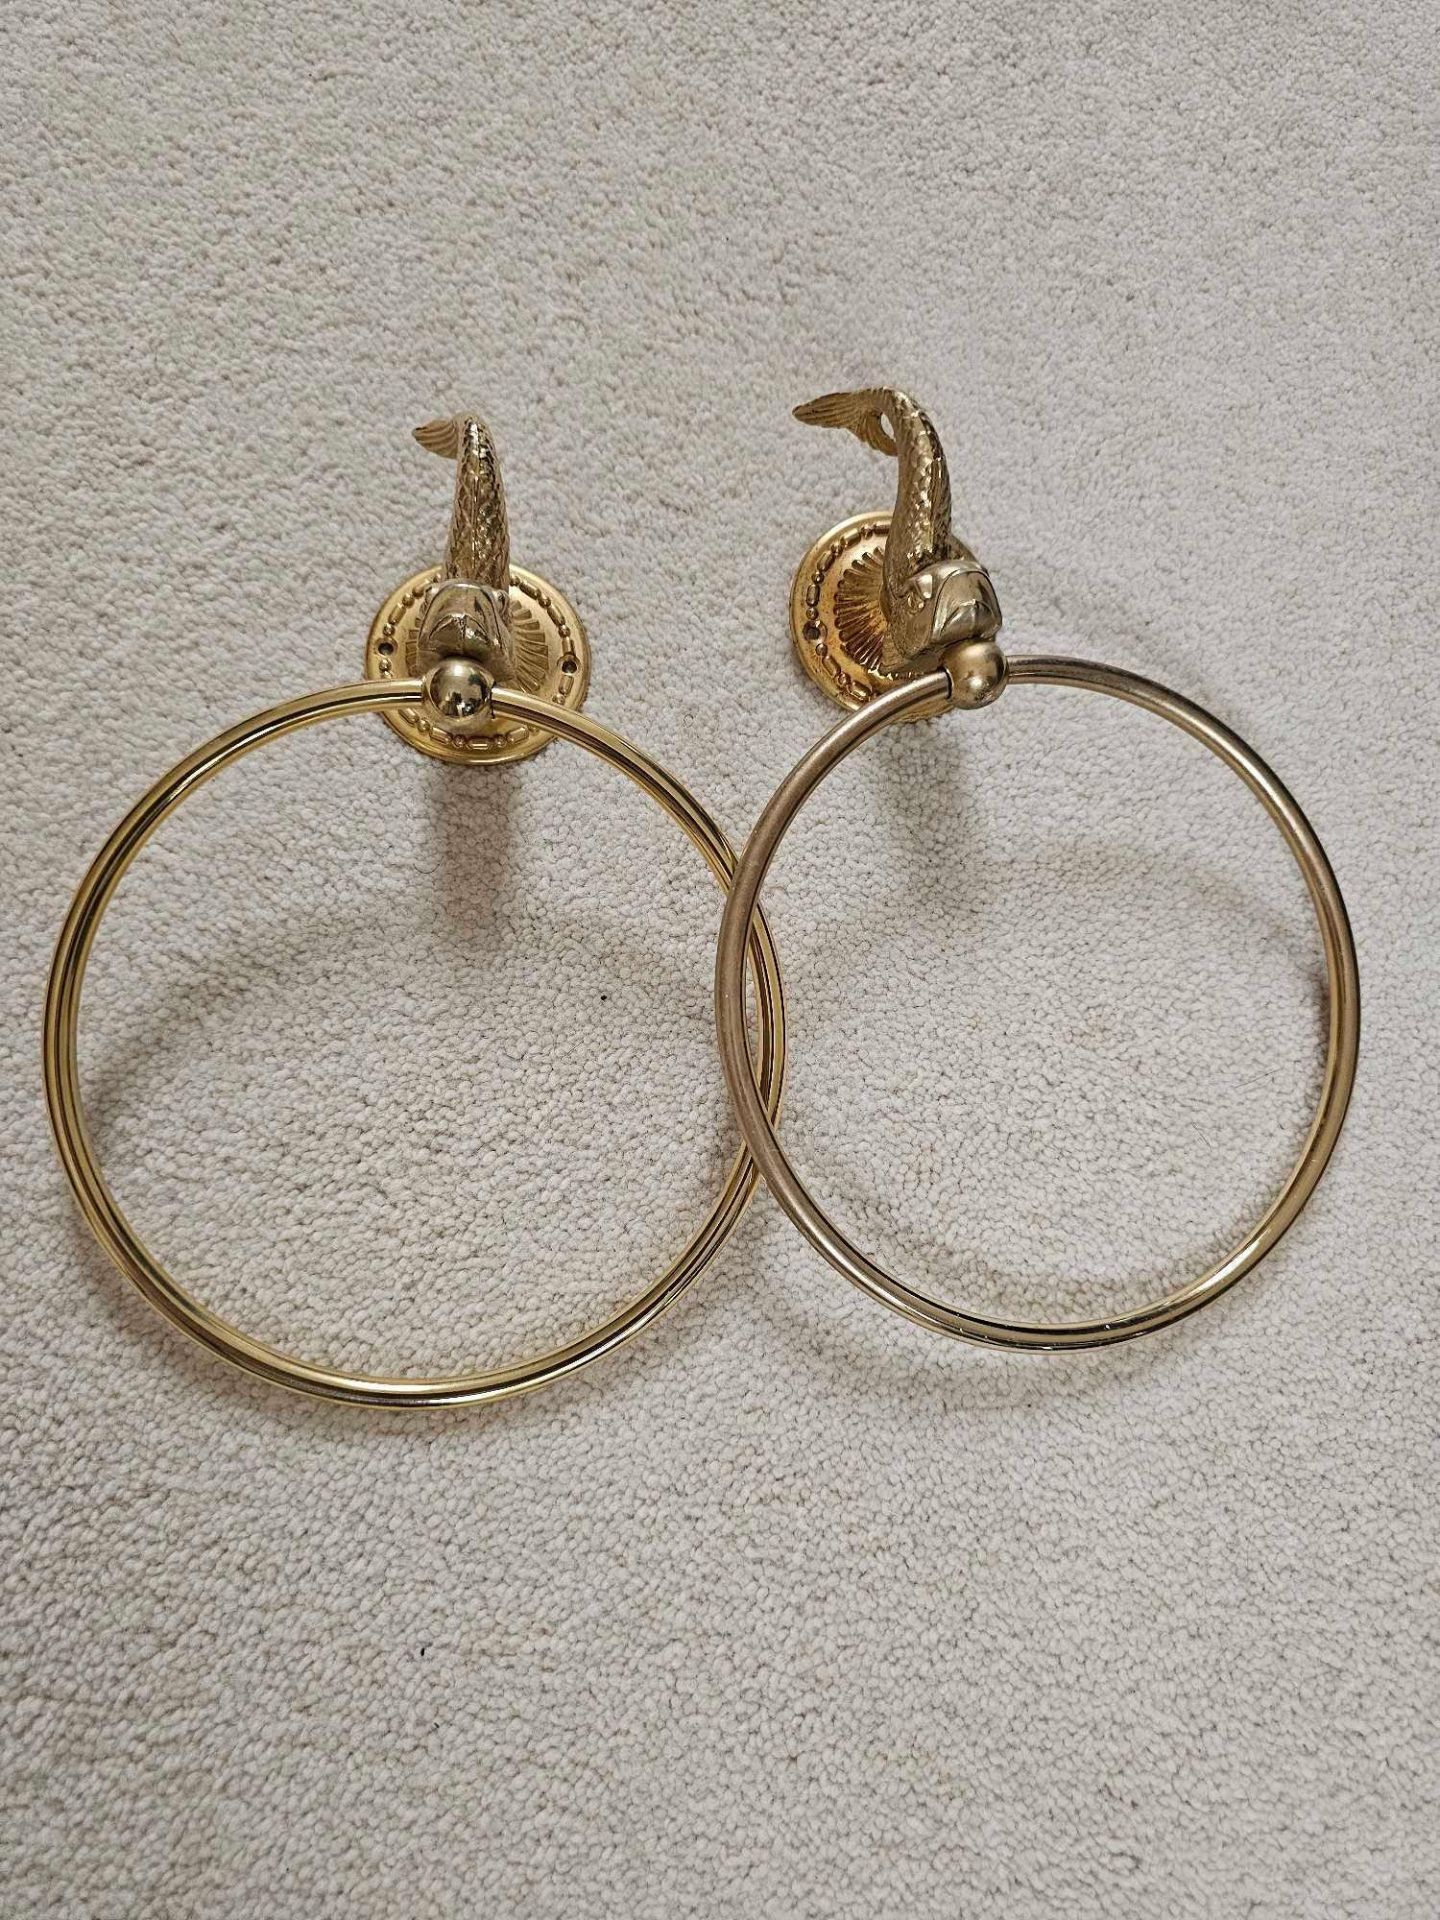 2 X Brass Towel Rings With Dolphin Form Mounts - Image 2 of 2